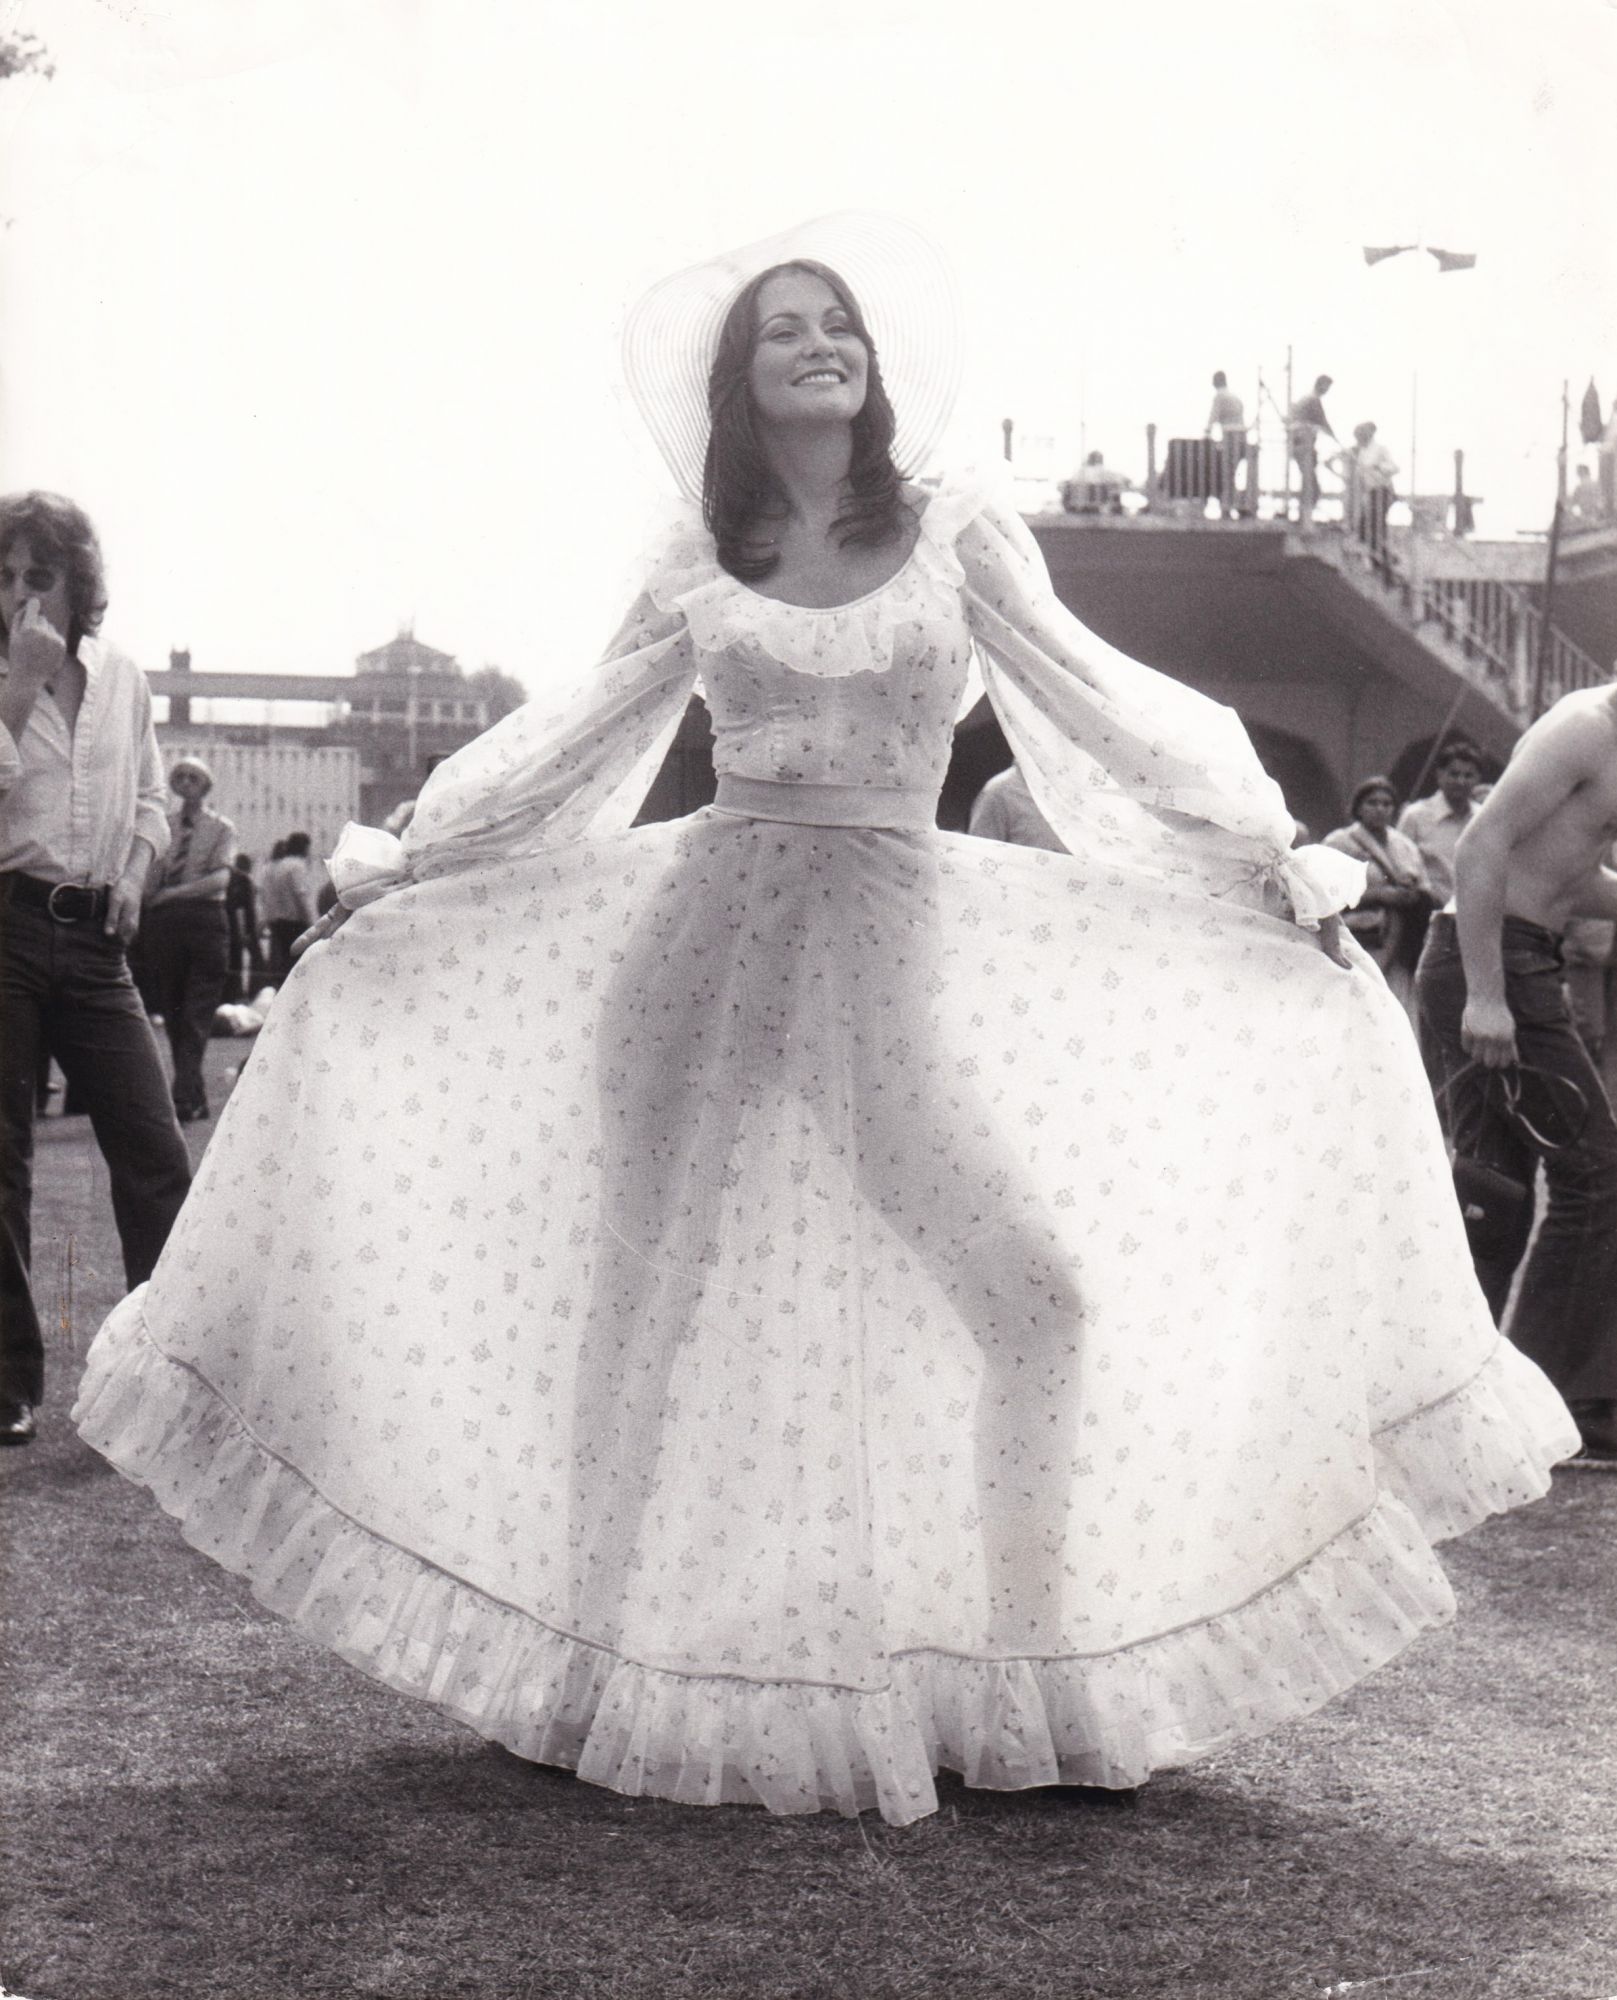 Original photograph of Linda Lovelace at Lord's cricket ground, June 20